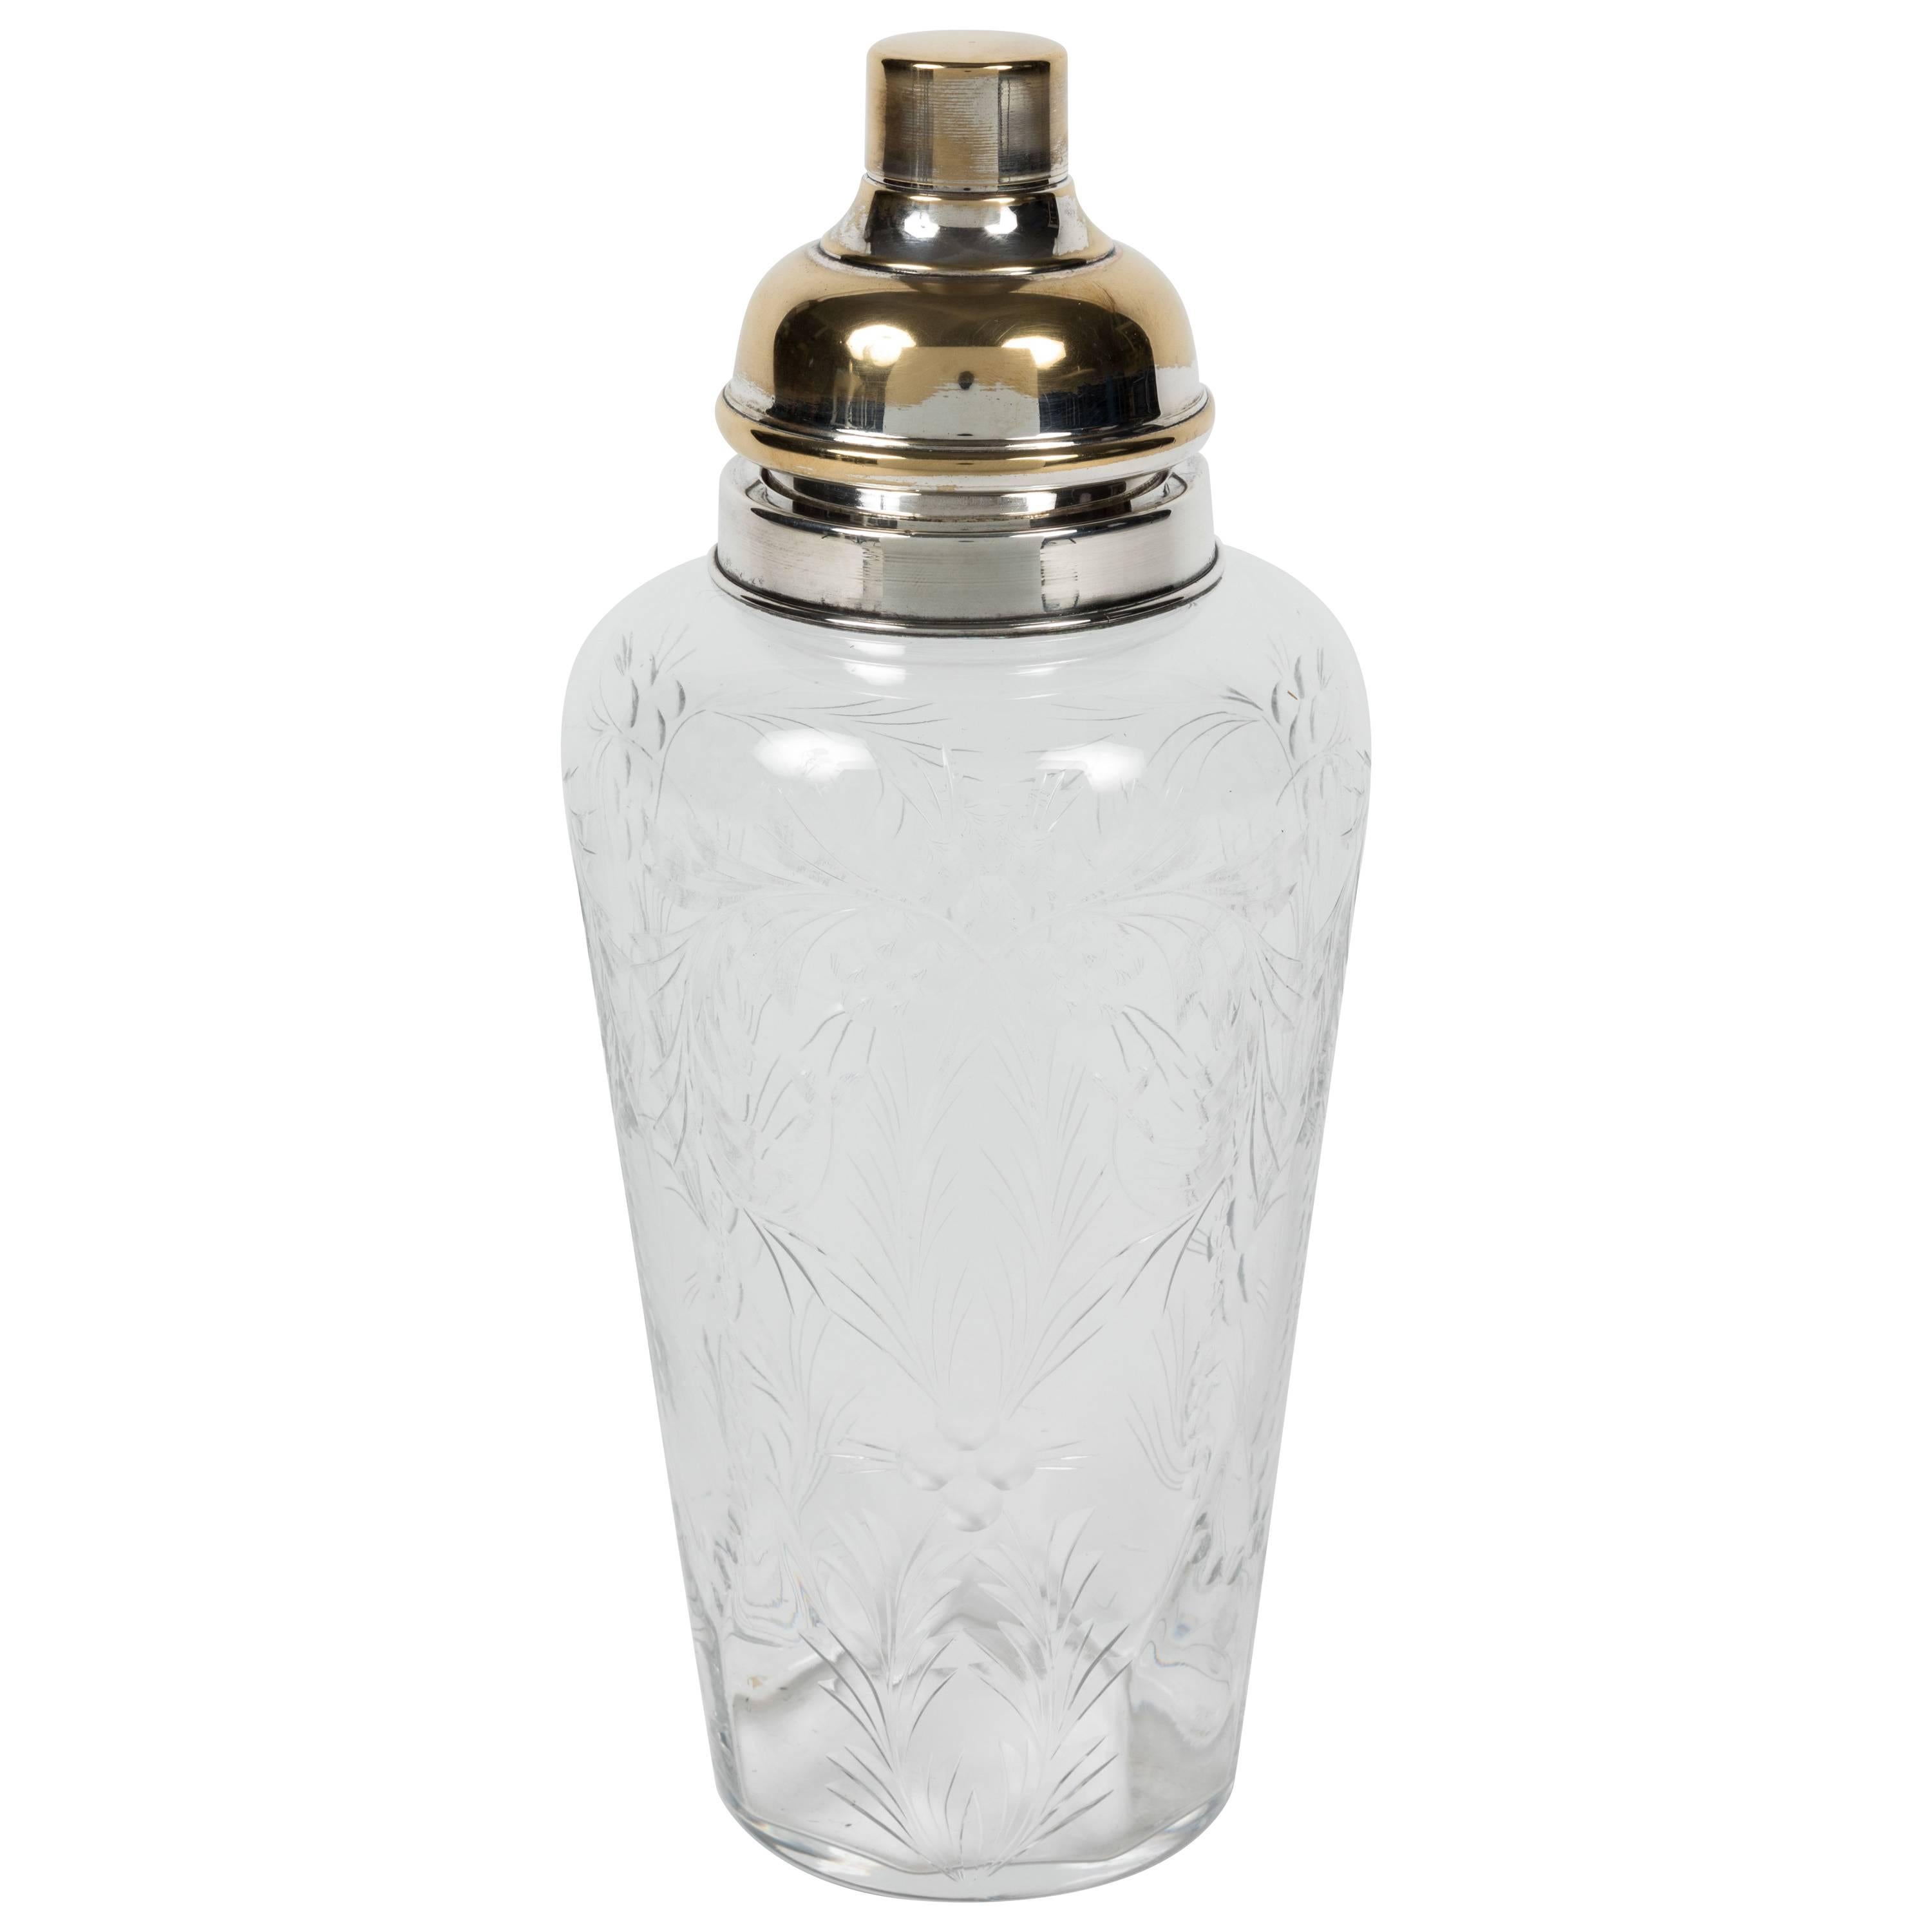 Etched Crystal and Silver-Plated Cocktail Shaker by Hawkes